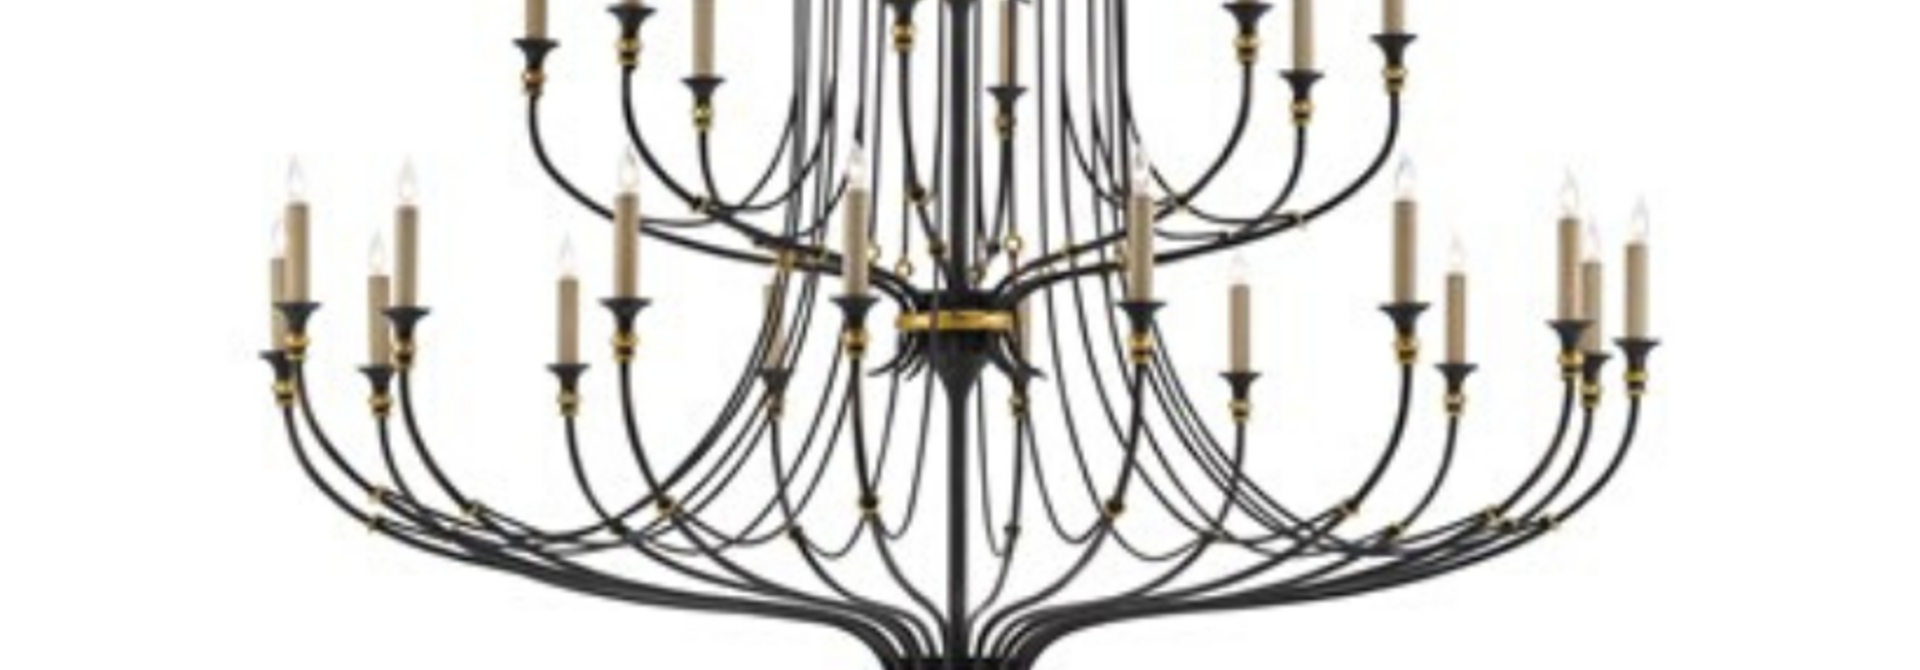 Folgate | The Chandelier Collection